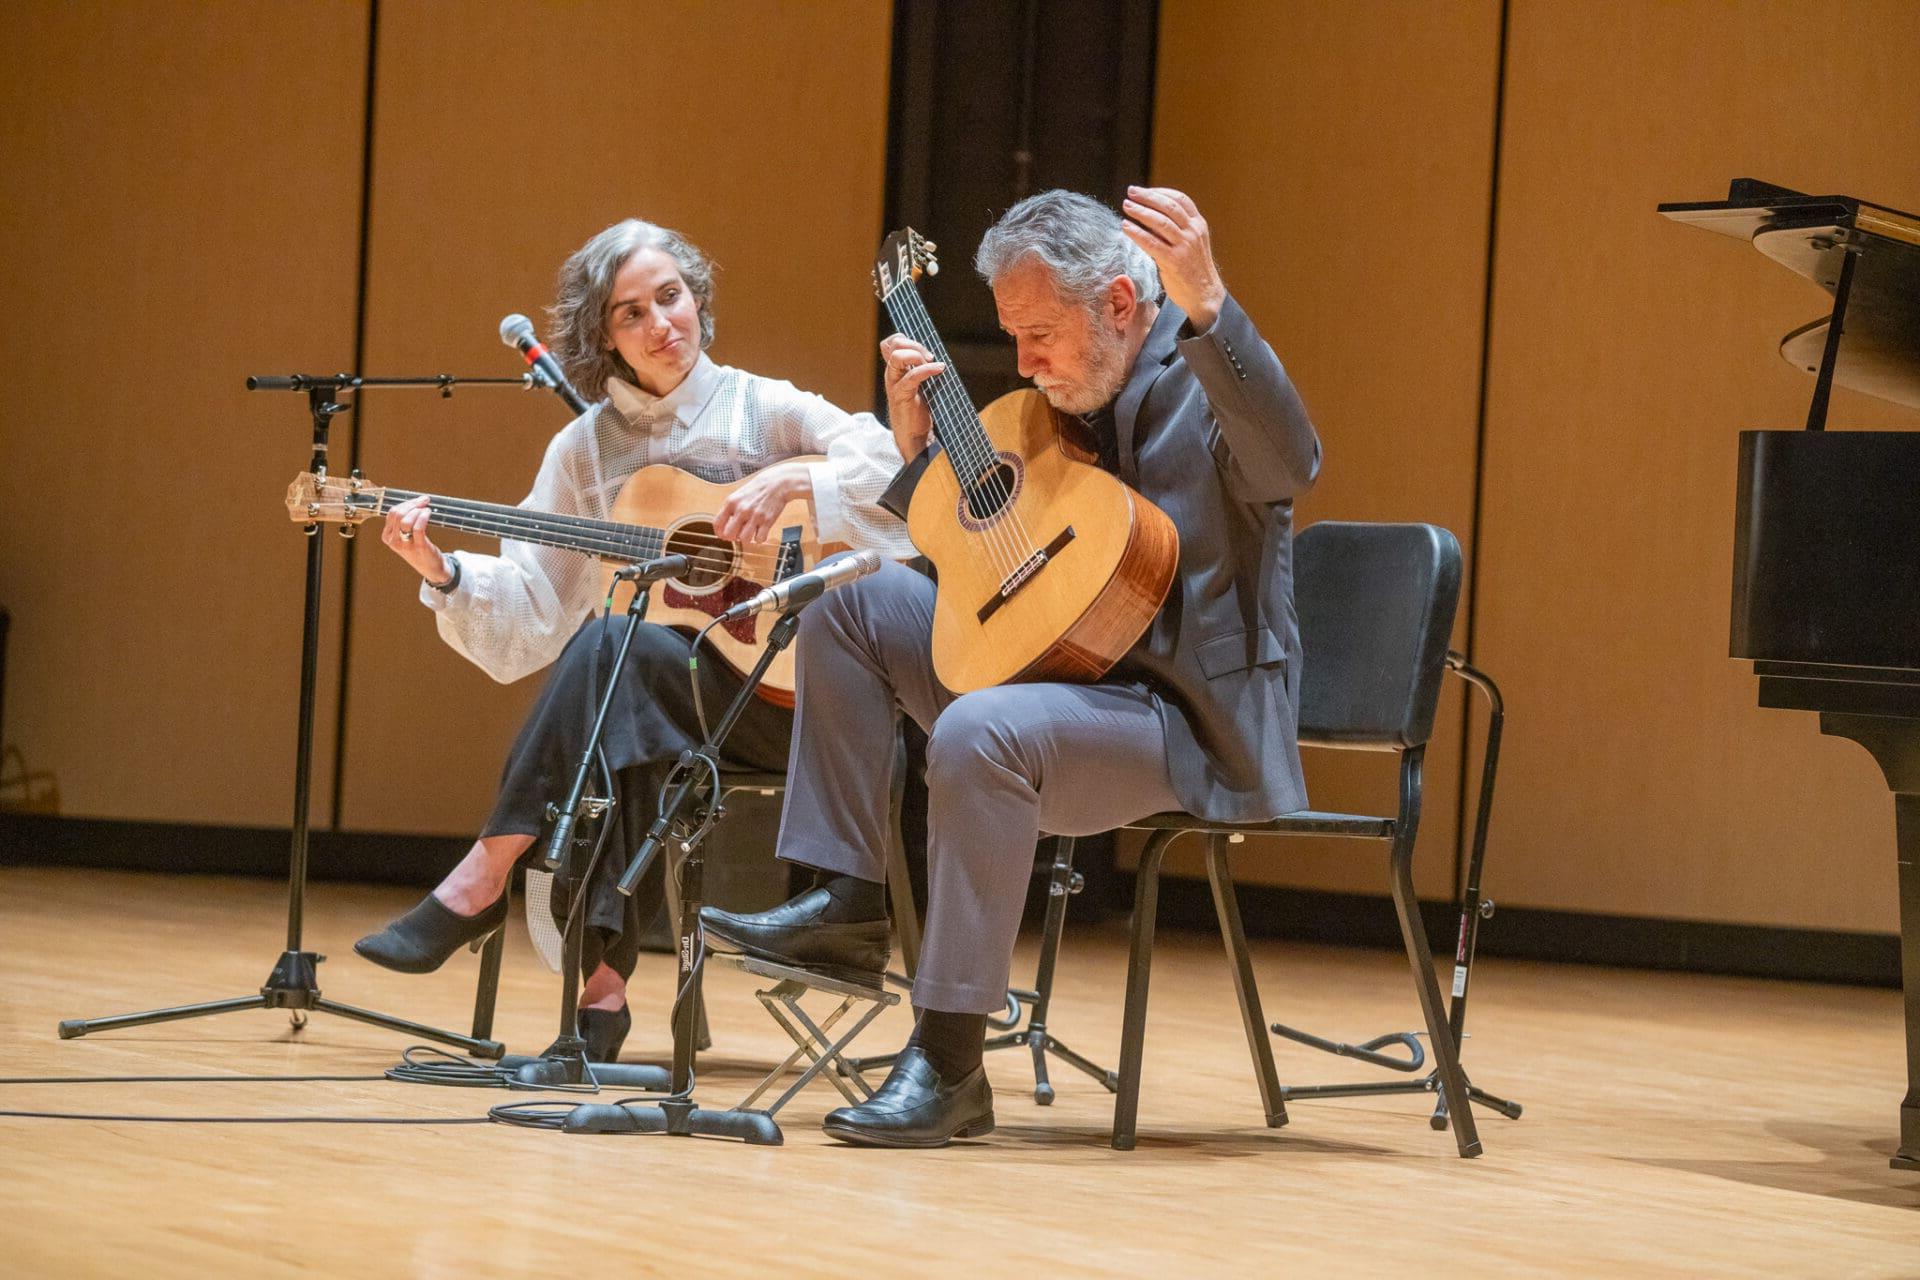 Musicians performing live with classical guitar and cello.